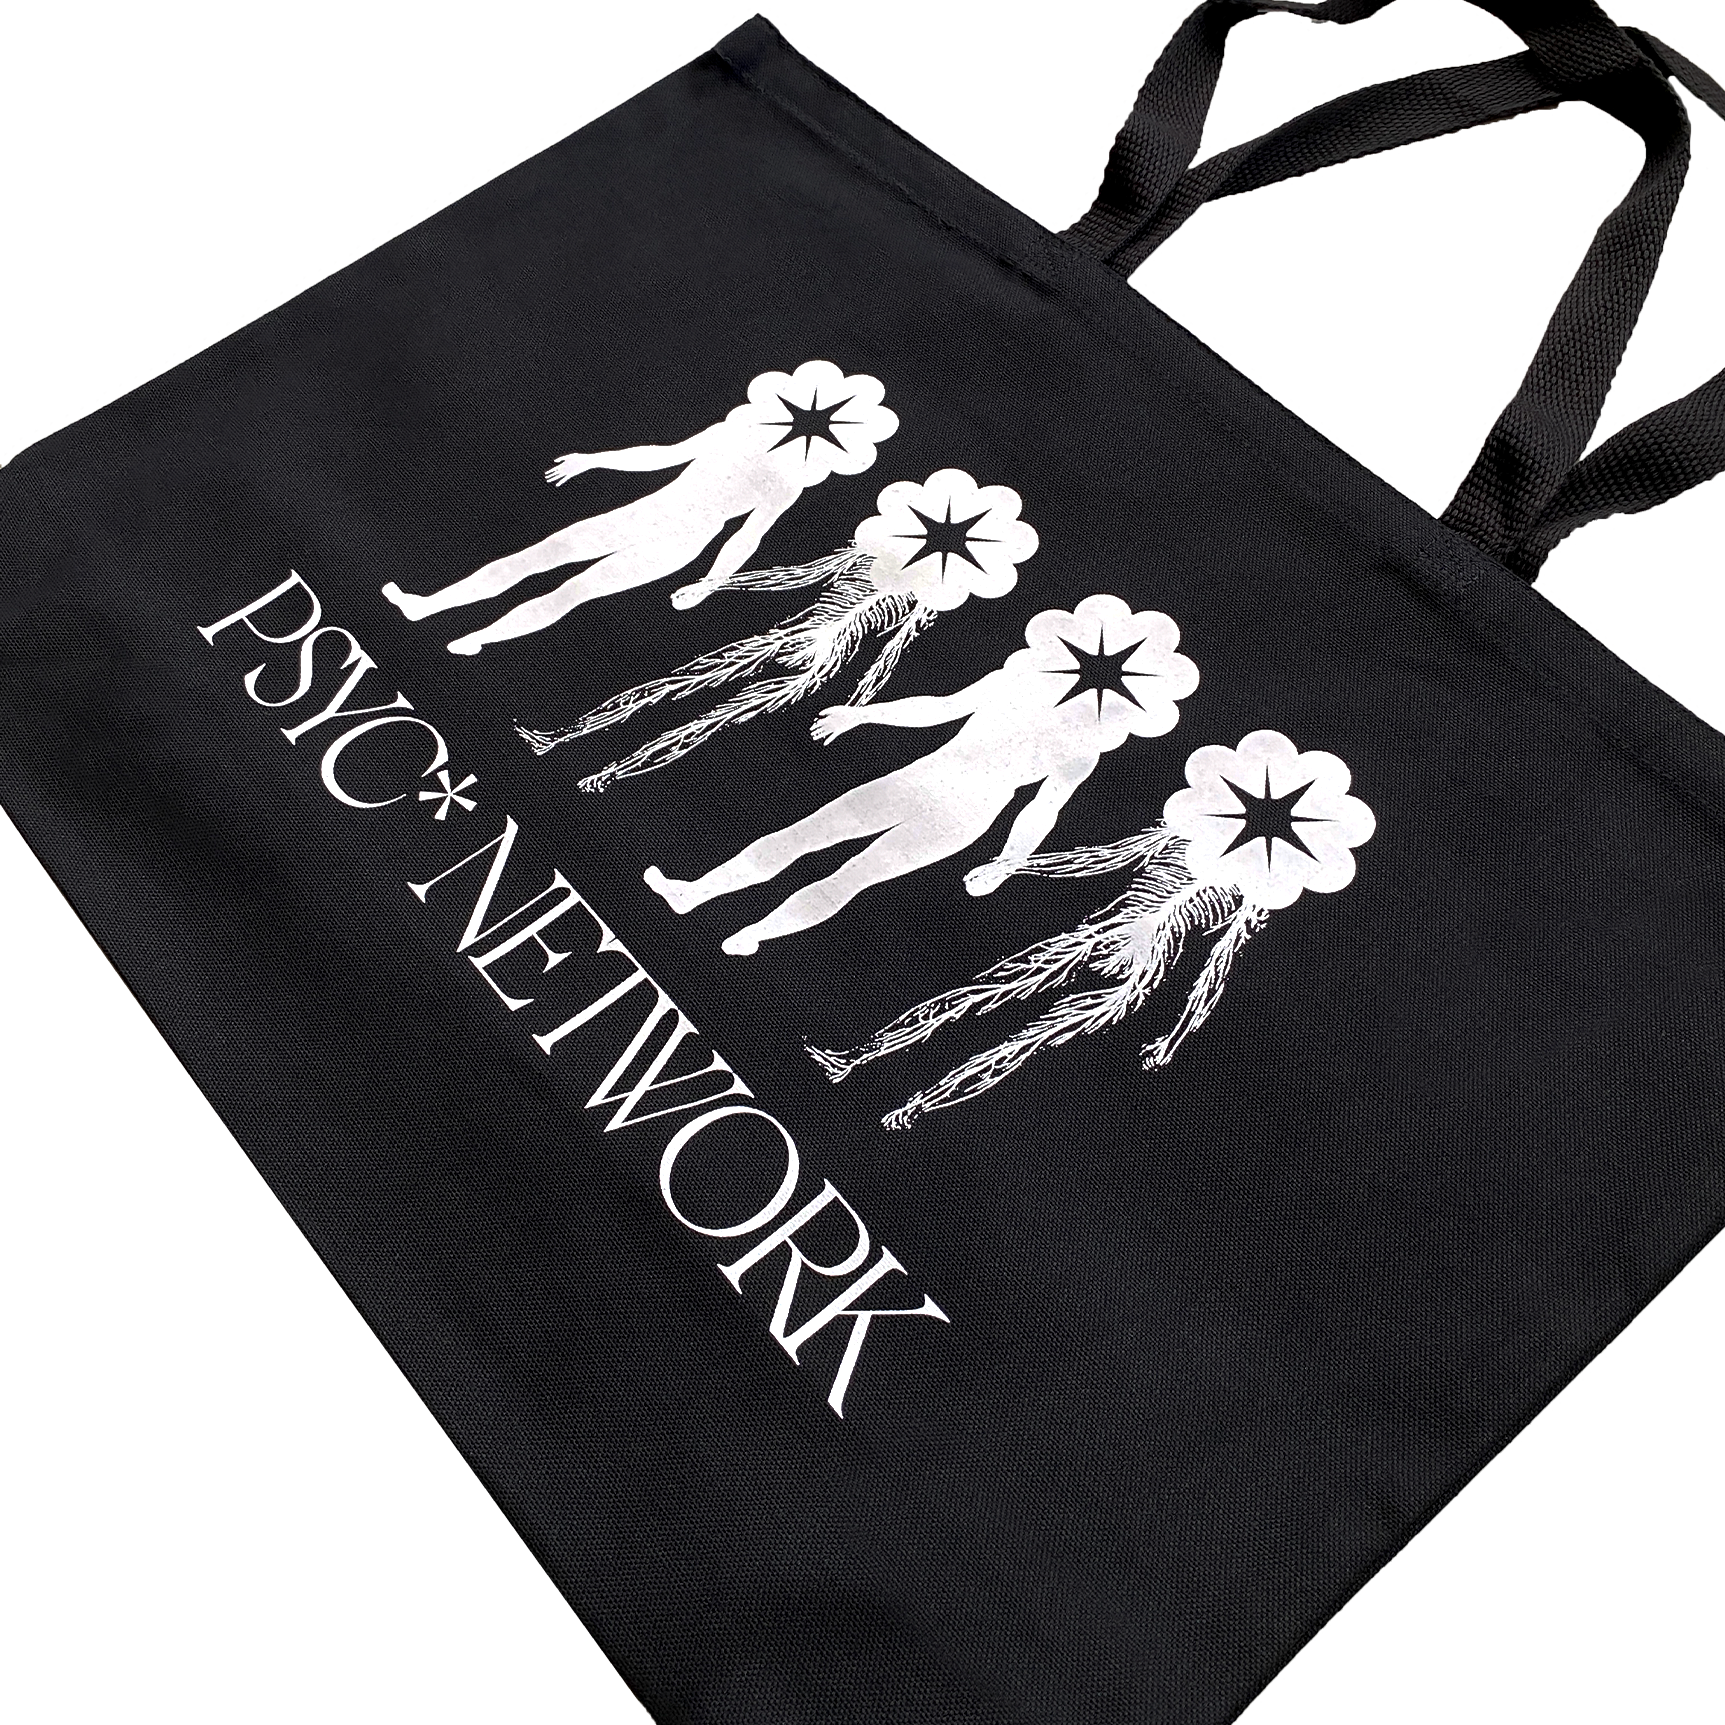 PSYC* NETWORK TOTE